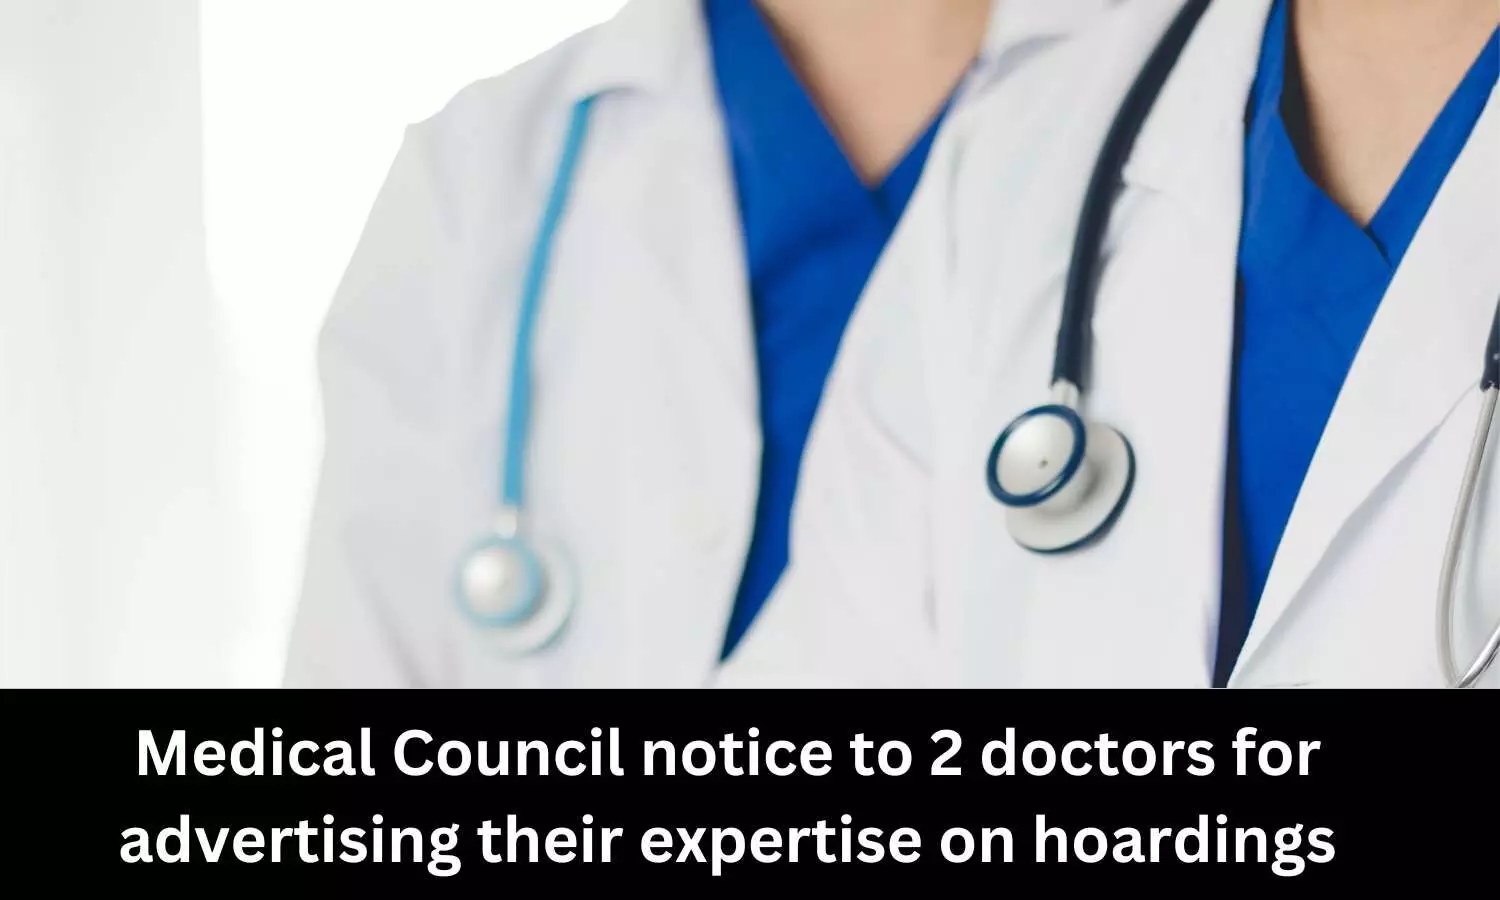 Advertisement of expertise on hoardings: Medical Council issues notice to 2 doctors